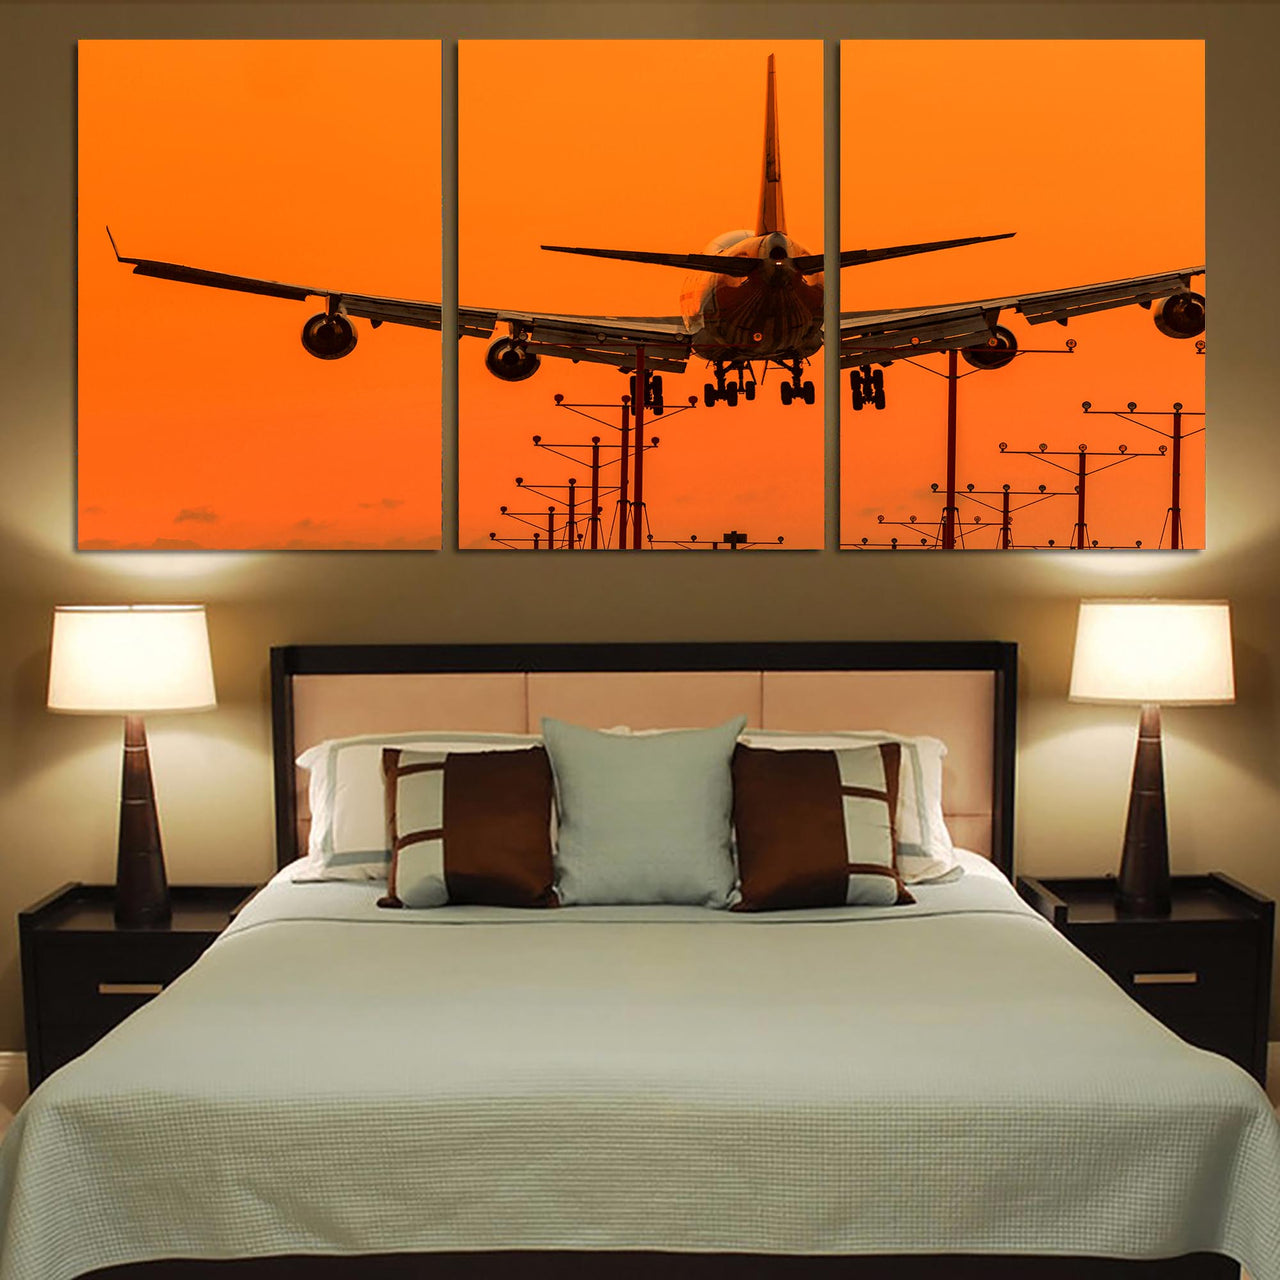 Close up to Boeing 747 Landing at Sunset Printed Canvas Posters (3 Pieces)